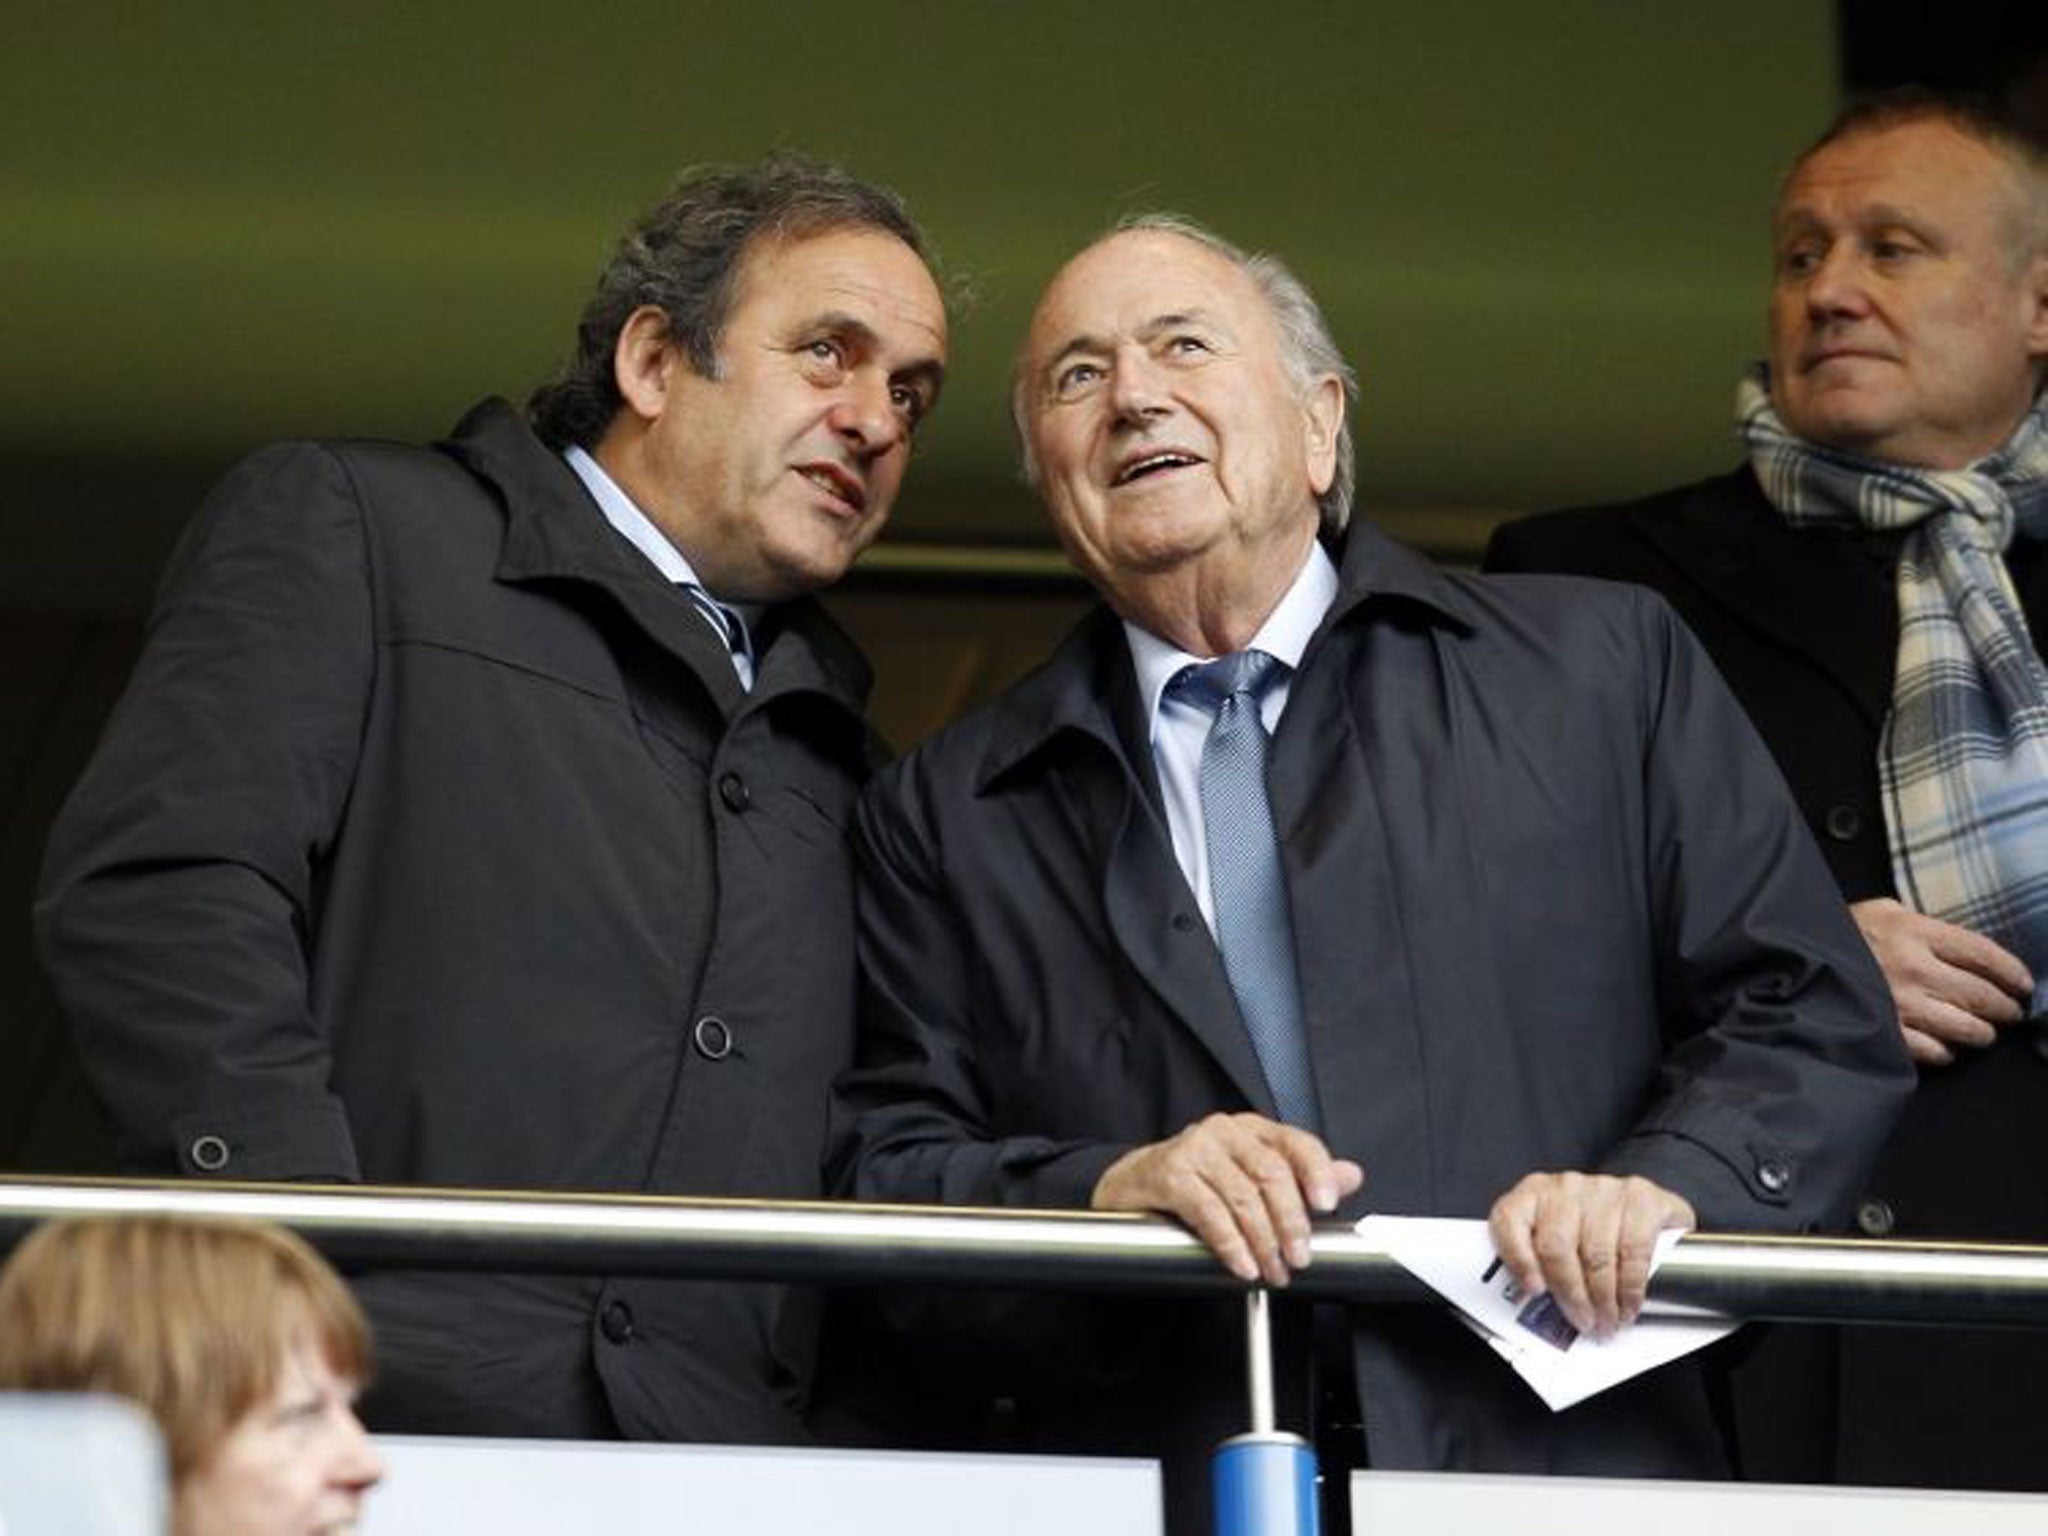 French Evolution: Michel Platini had Sepp Blatter to thank for his rise at Uefa but now wants the game’s top job